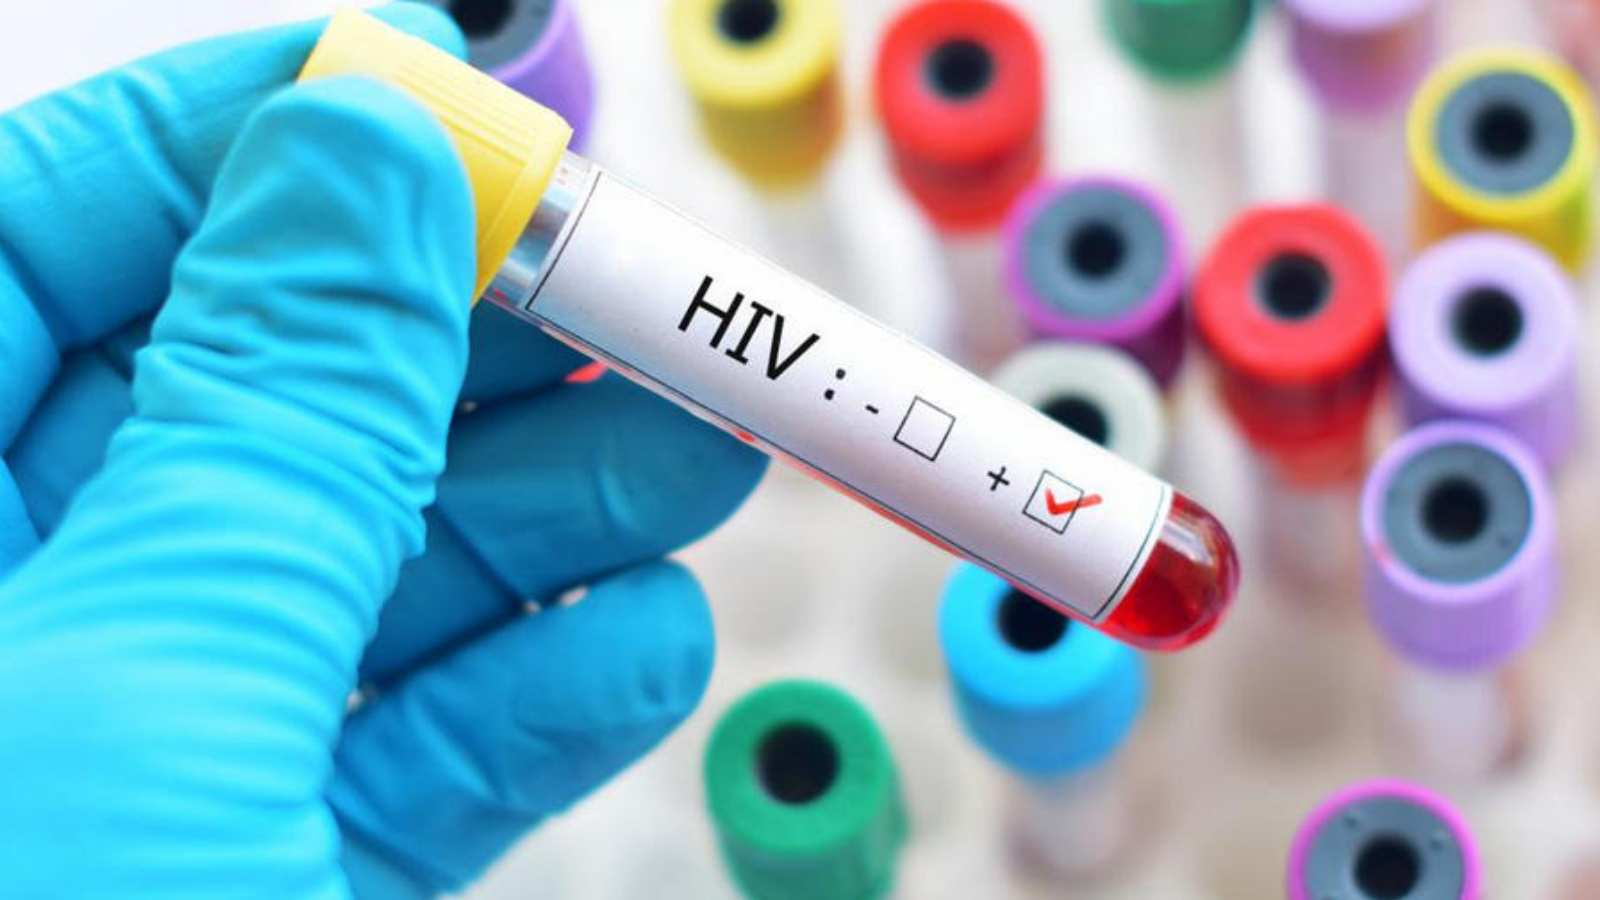 Rwanda has significantly reduced HIV-related stigma, discrimination and abuse of rights of people living with the virus. /Getty Images